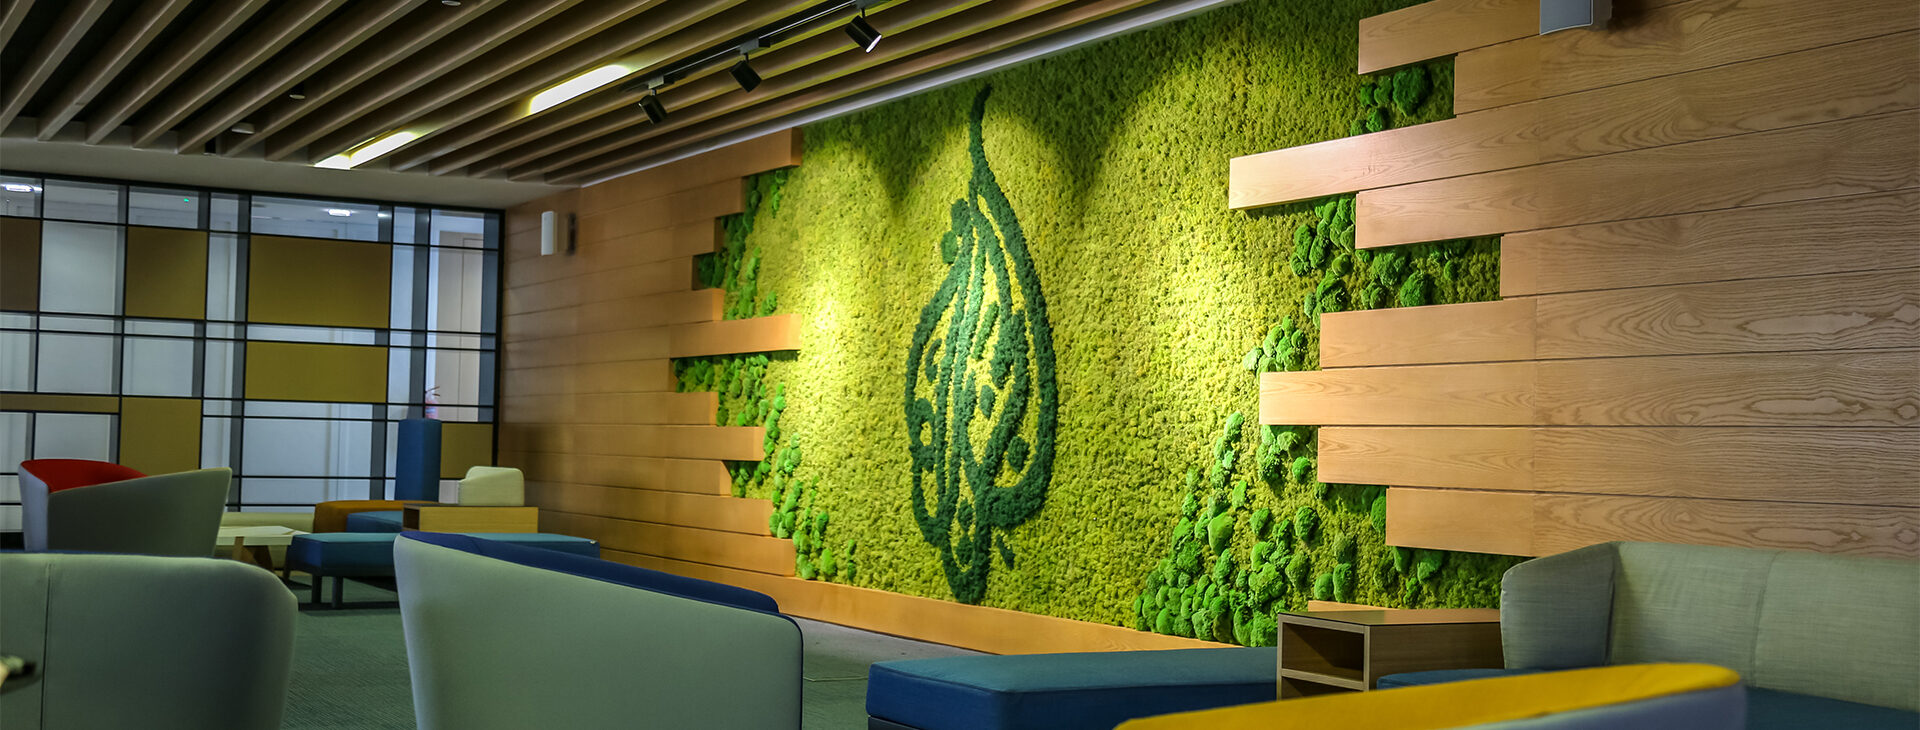 We provide Preserved<br />
Indoor Green Wall